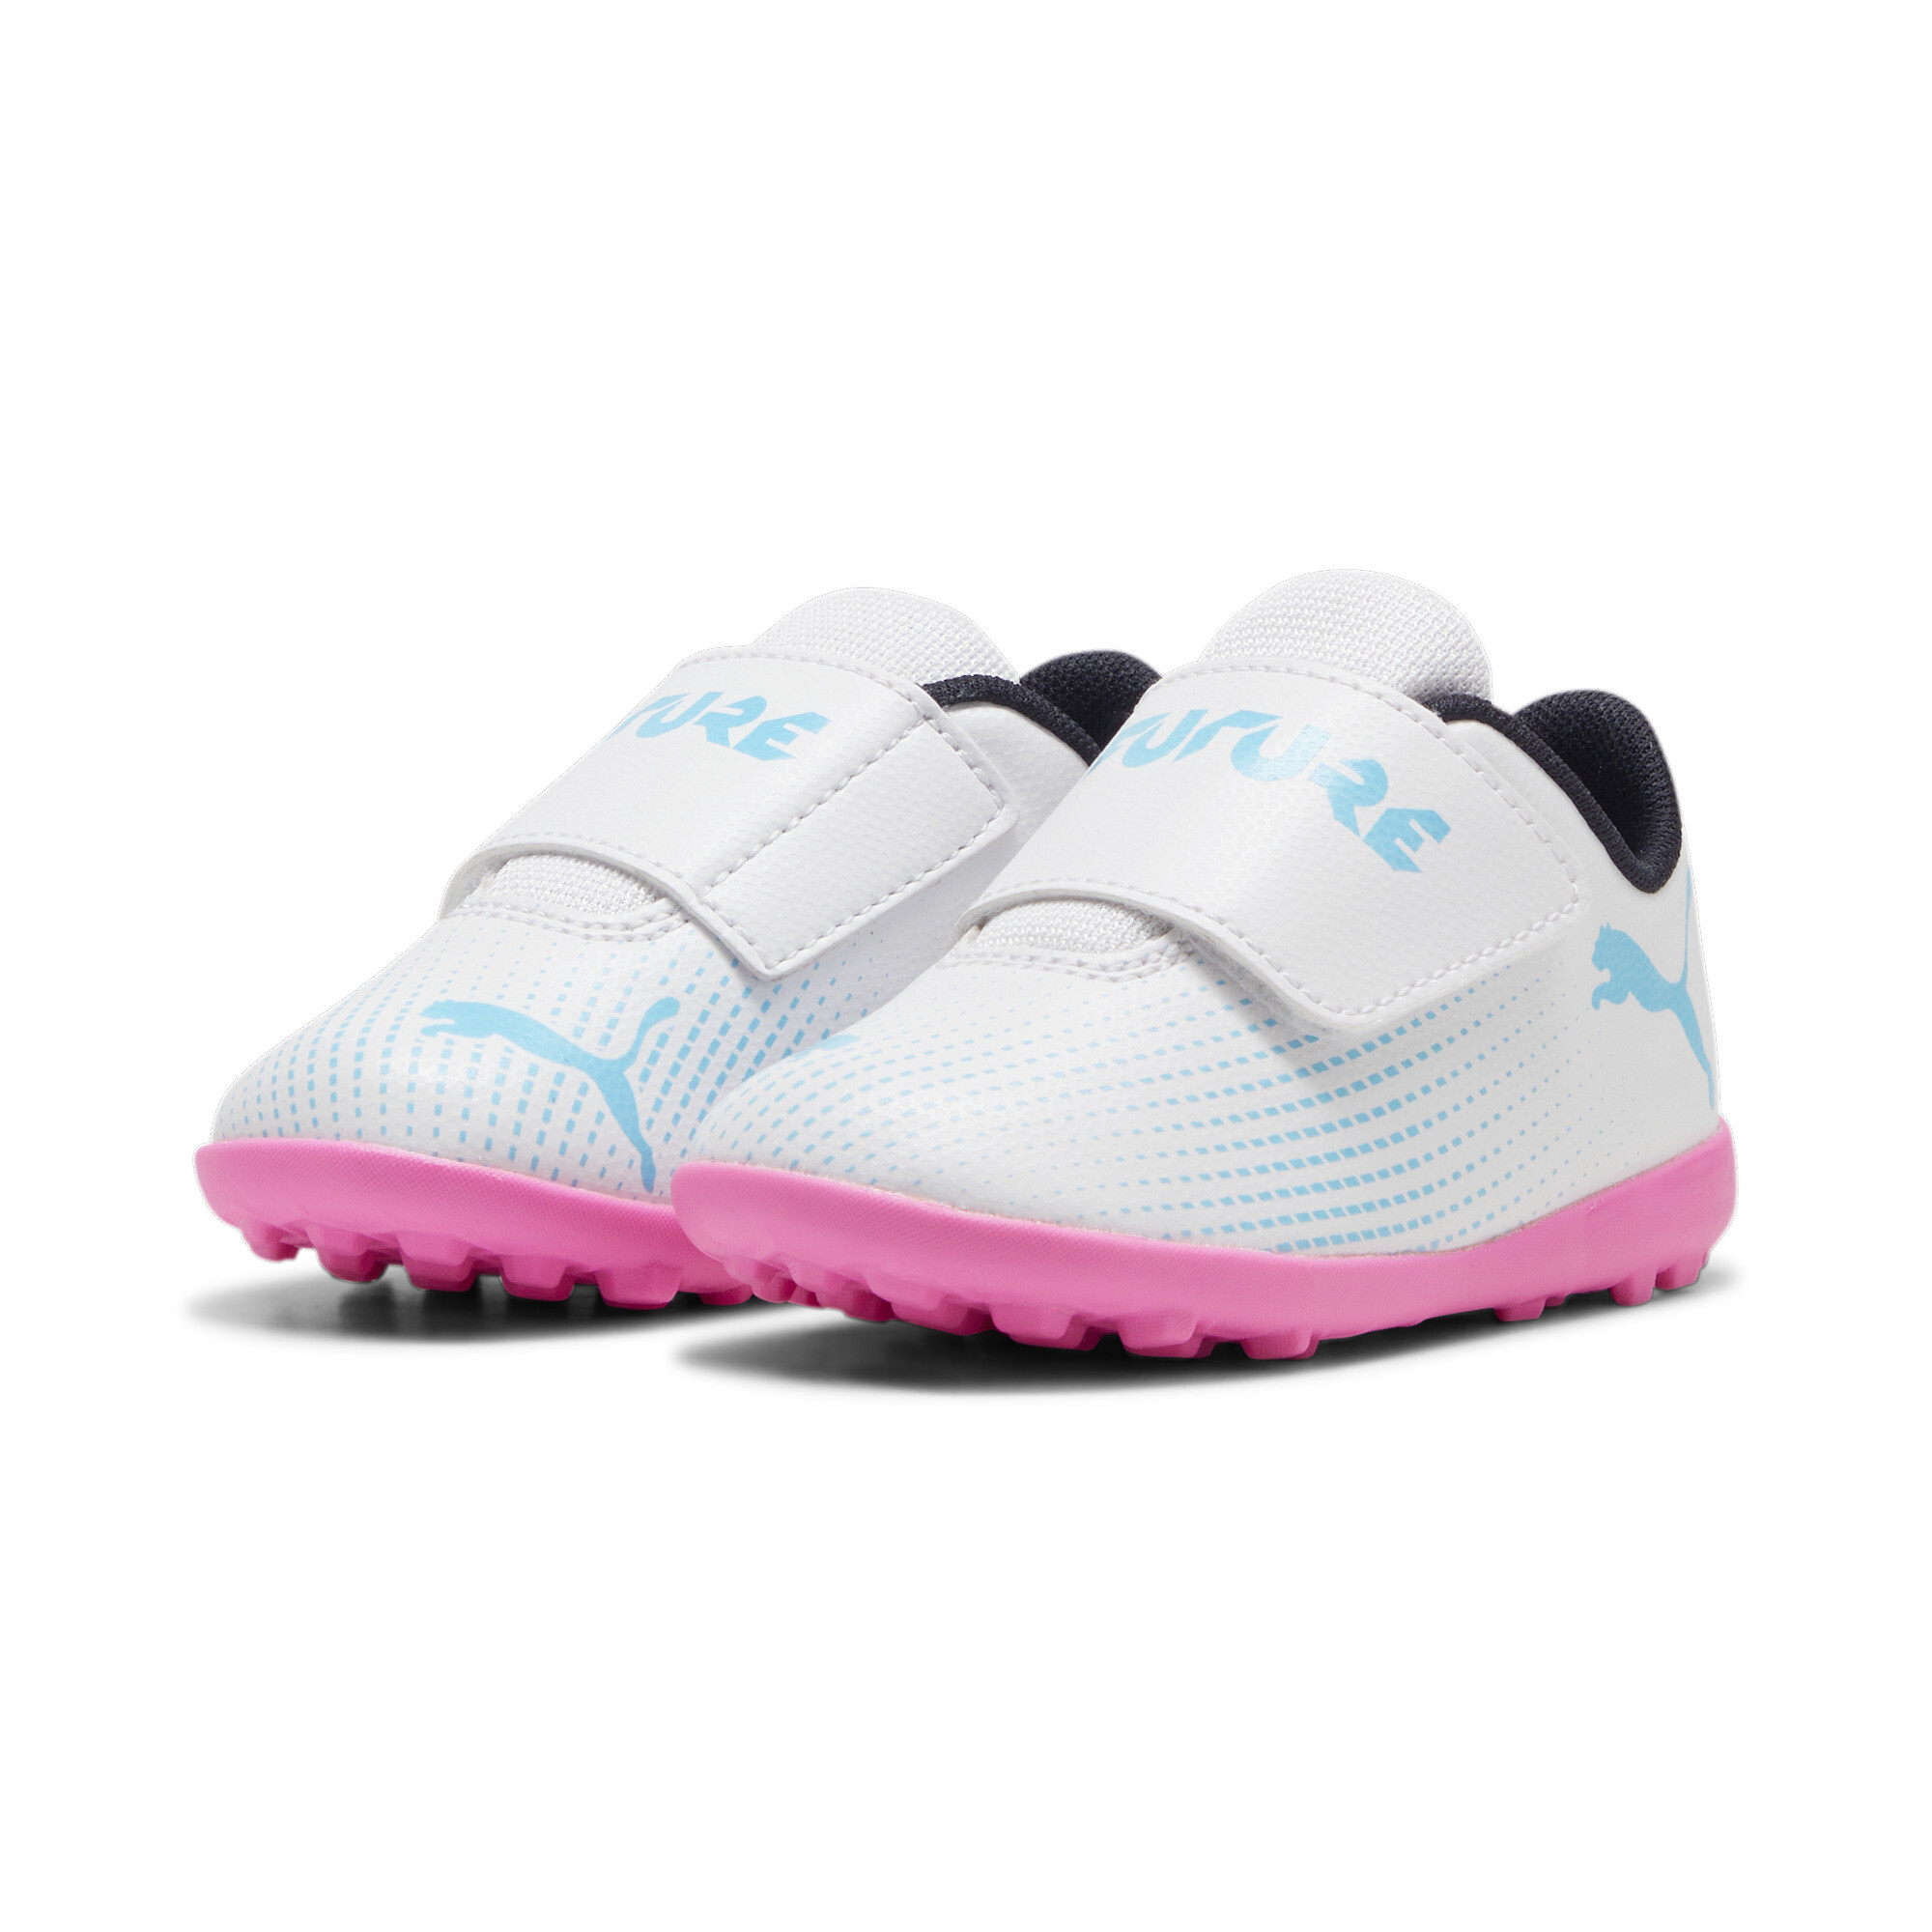 Kids' PUMA FUTURE 7 PLAY TT Toddlers' Football Boots In White/Pink, Size EU 19